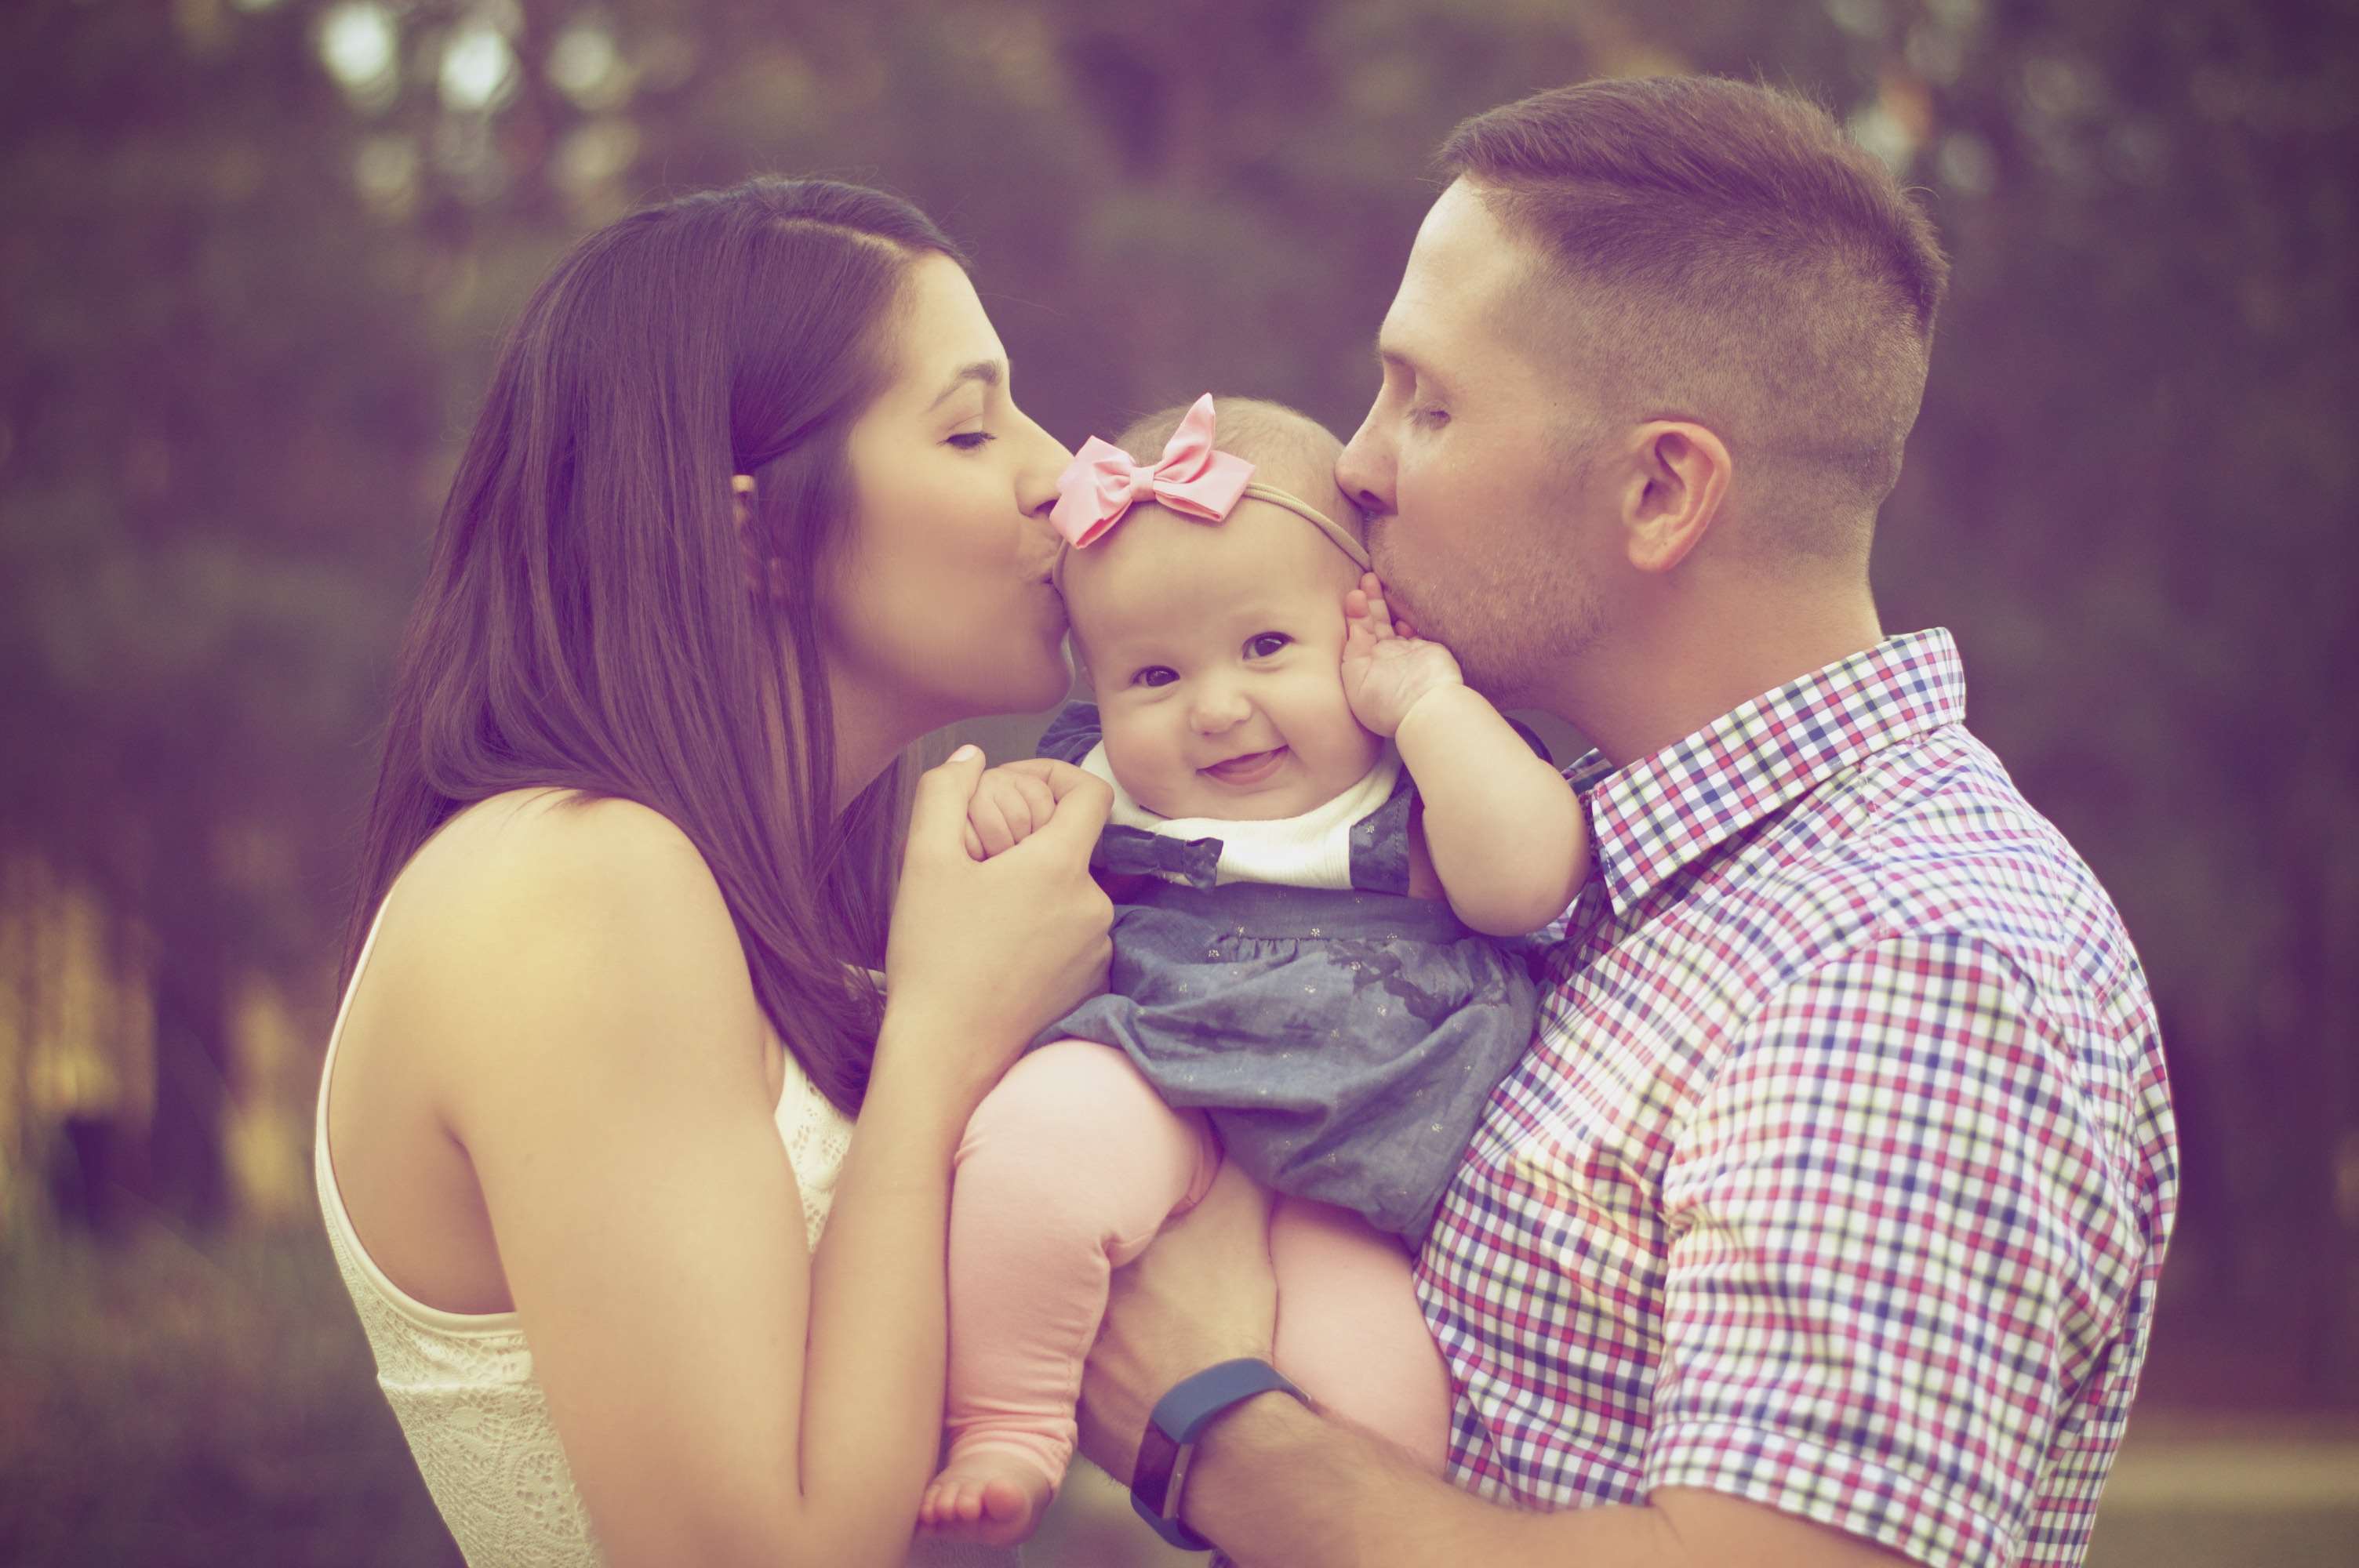 affection, baby, baby girl, beautiful, beautiful girl, beauty, blur, blurred background, blurry, casual, child, cute, dad, embrace, enjoy, family, father, fun, girl, happiness, joy, kisses, love, mom, moment, mother, outd wallpaper